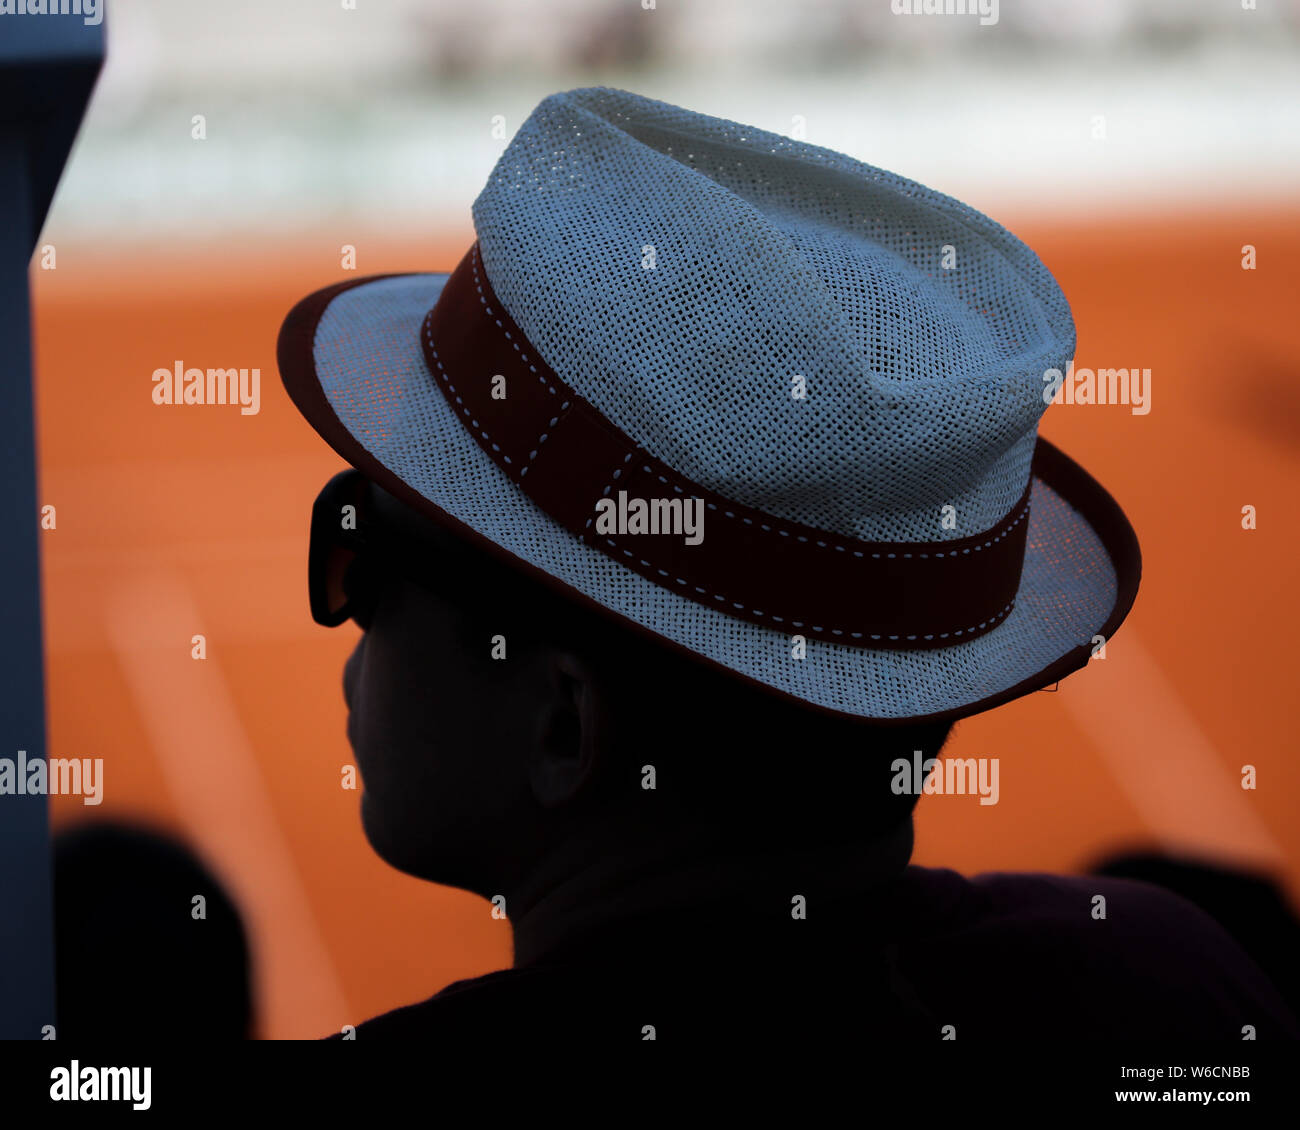 Close up of male spectator wearing a sun hat watching French Open 2019 tournament, Paris, France Stock Photo